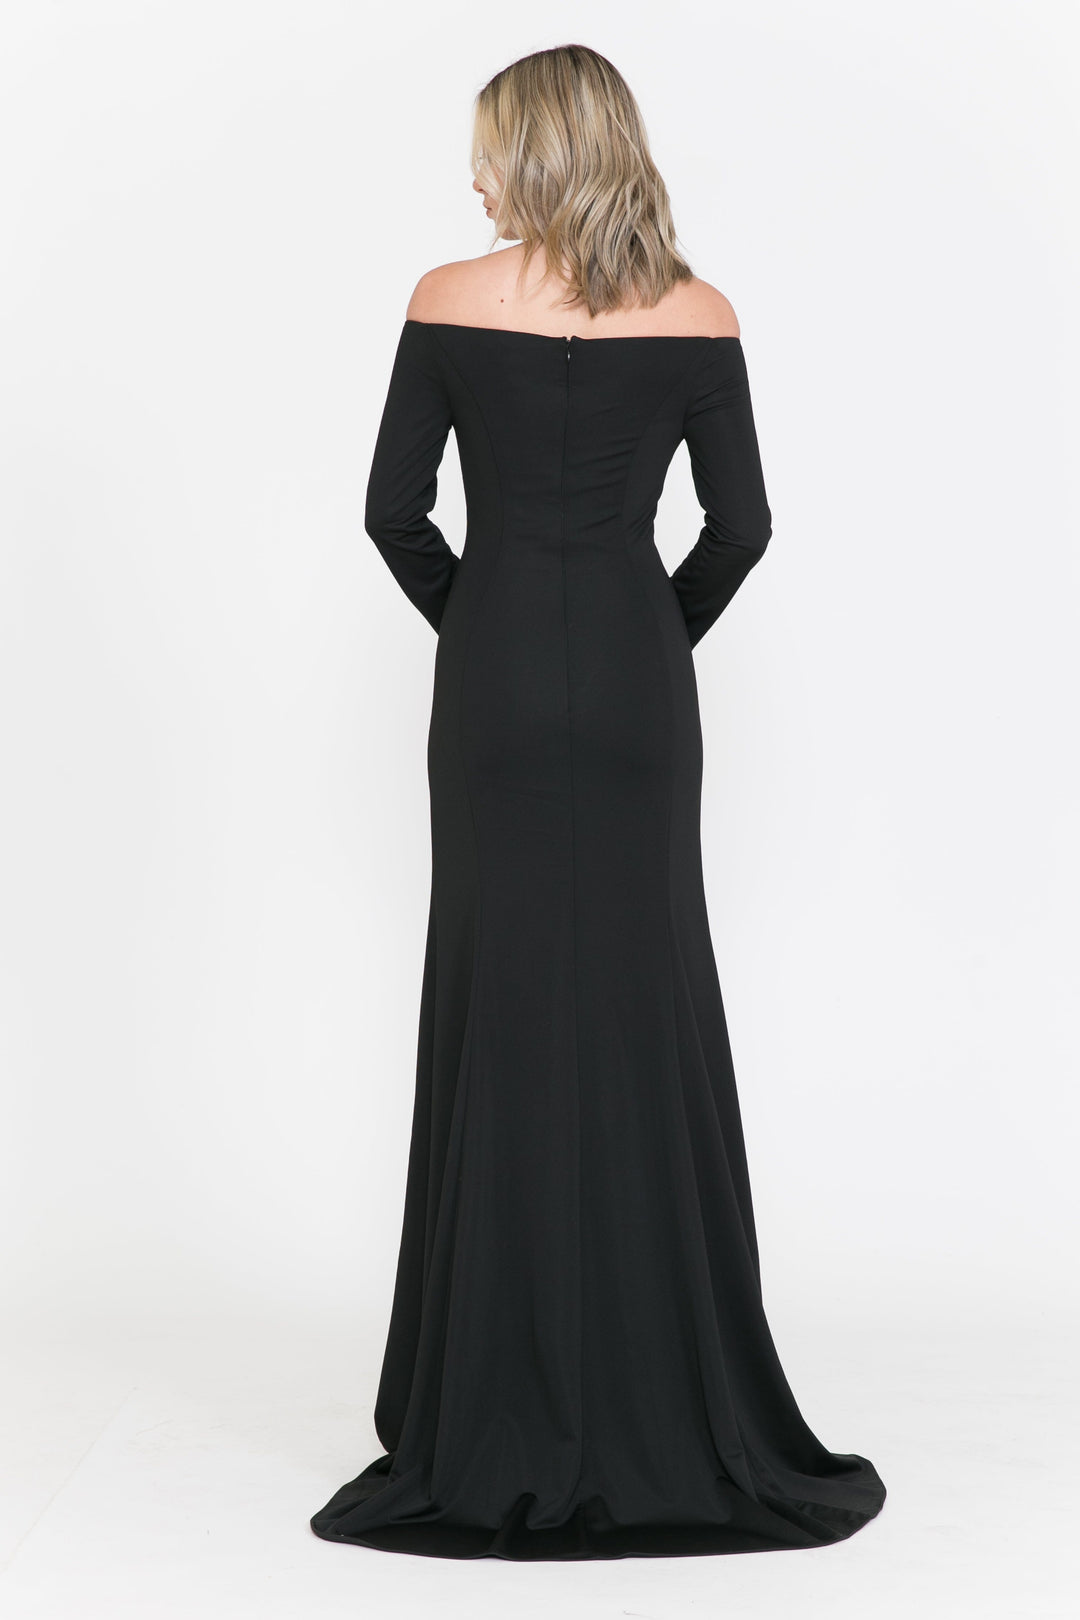 Off the Shoulder Gown with Long Sleeves by Poly USA 8378